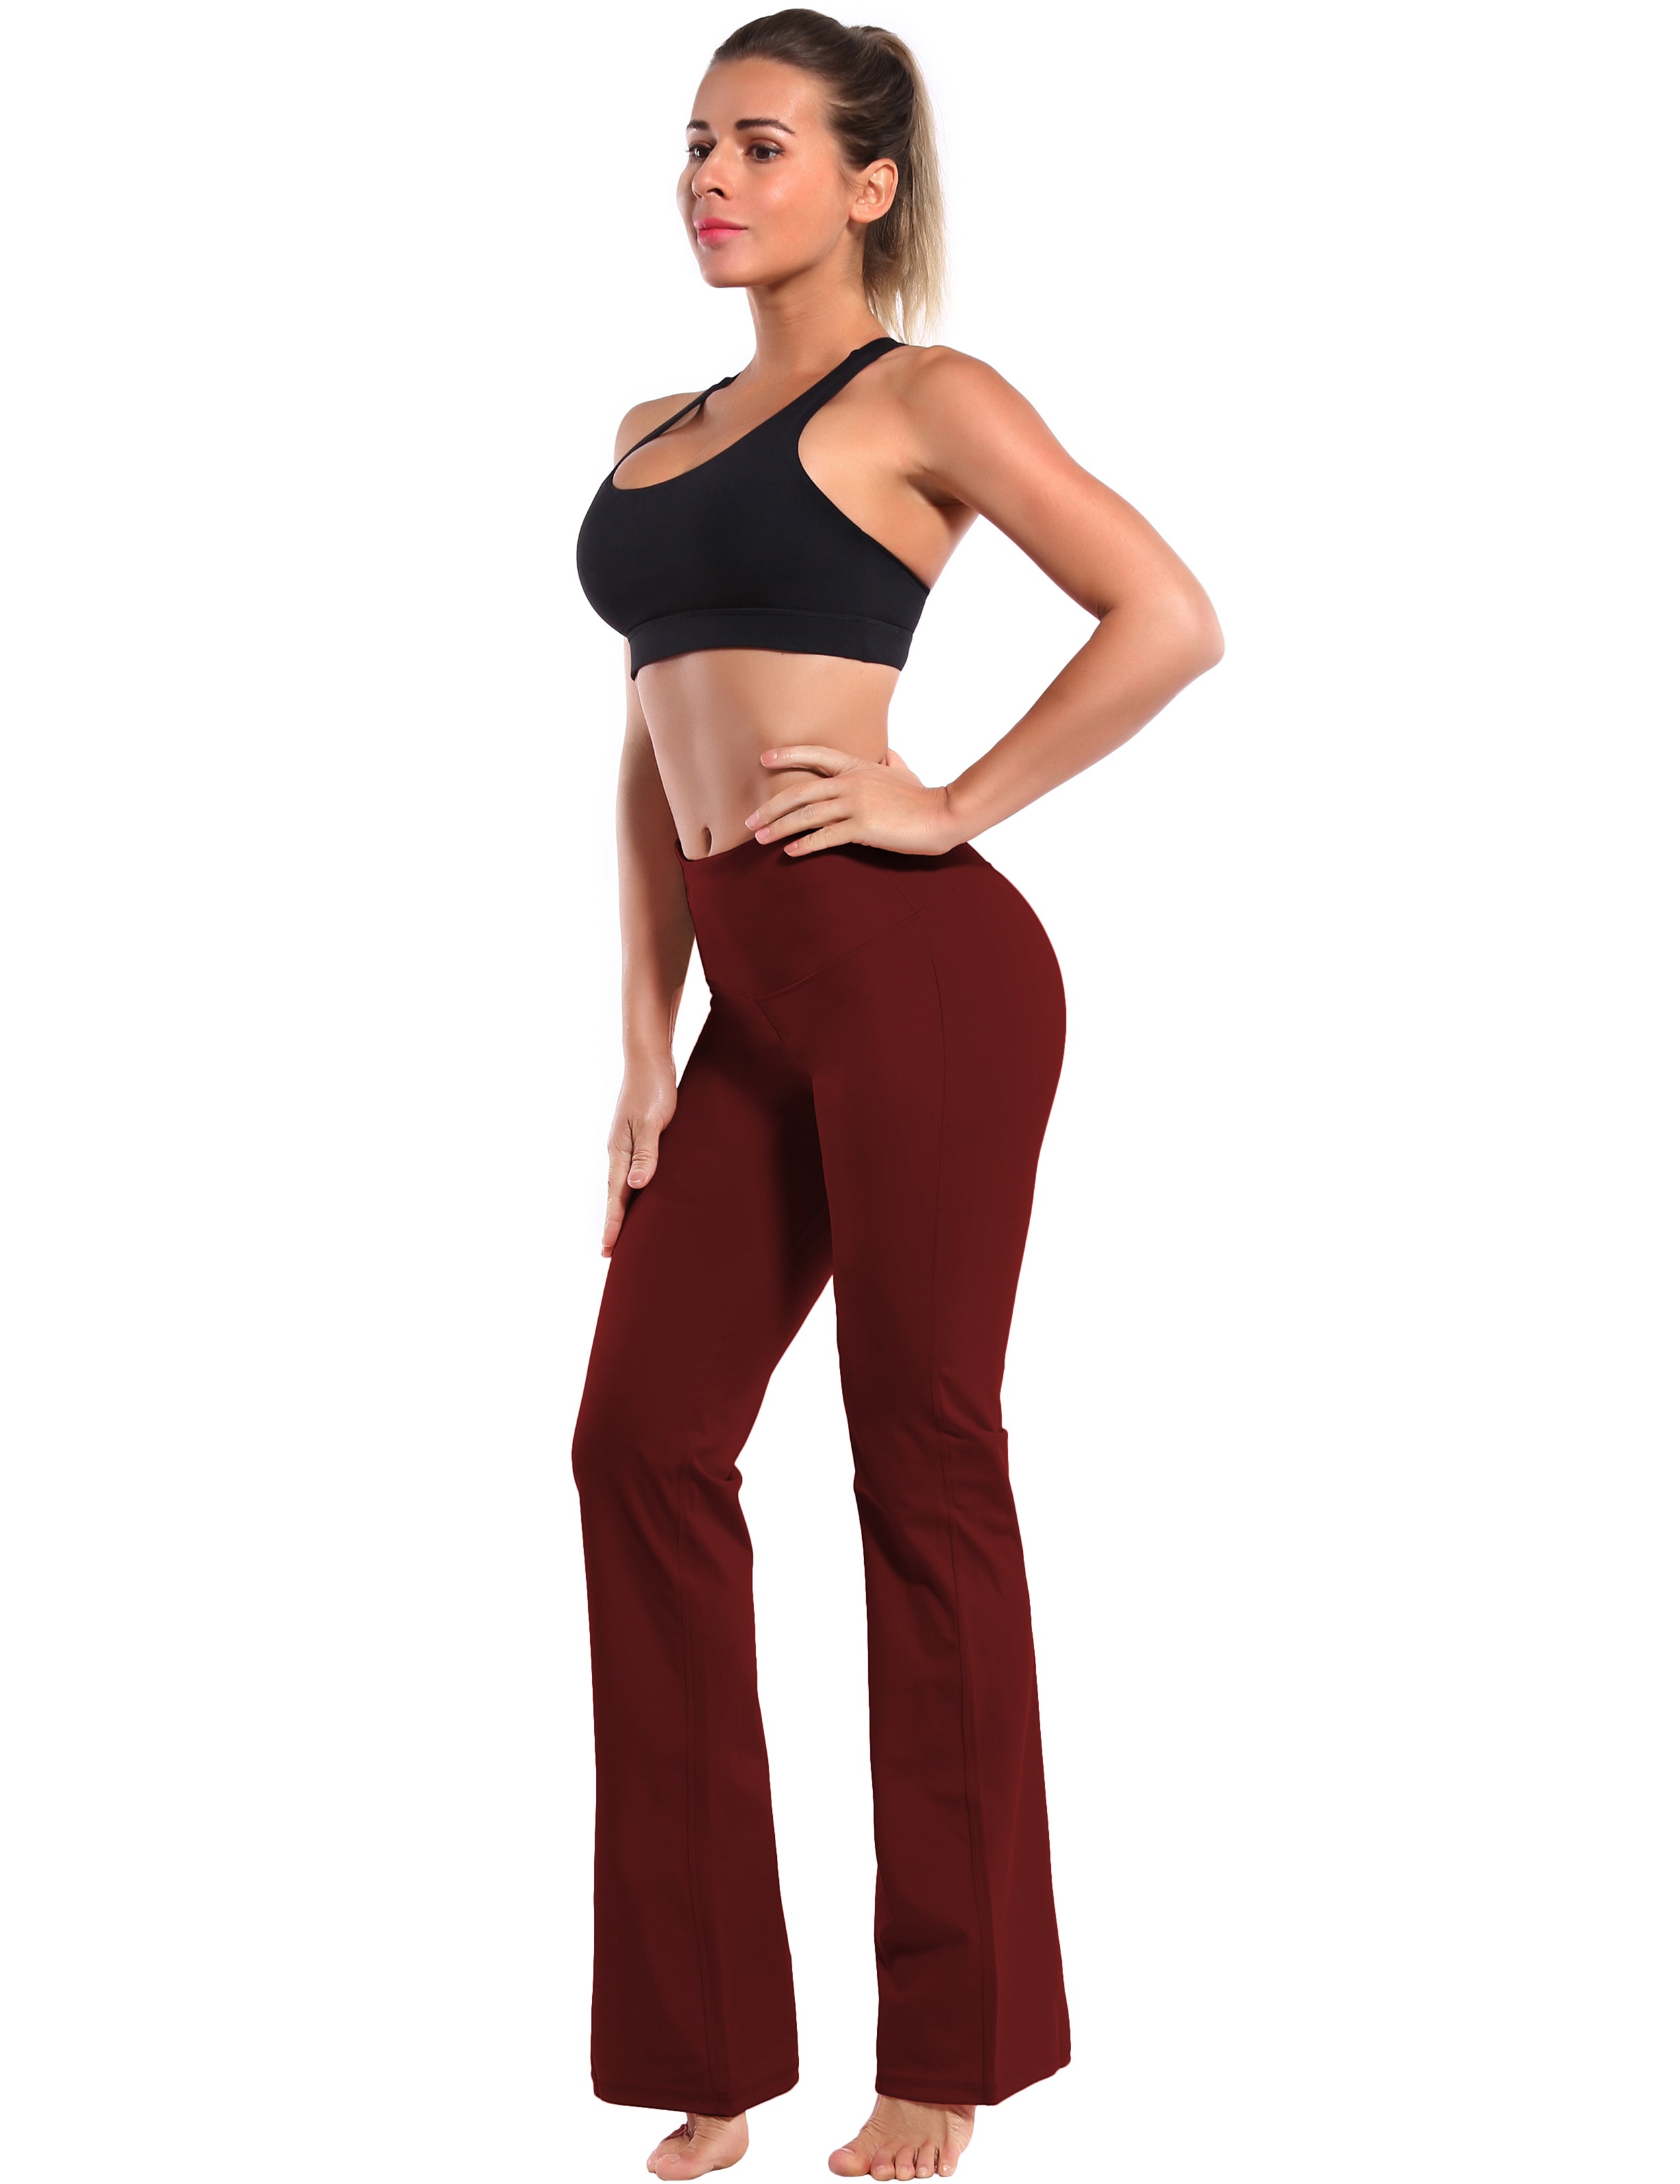 High Waist Bootcut Leggings Cherryred 75%Nylon/25%Spandex Fabric doesn't attract lint easily 4-way stretch No see-through Moisture-wicking Tummy control Inner pocket Five lengths